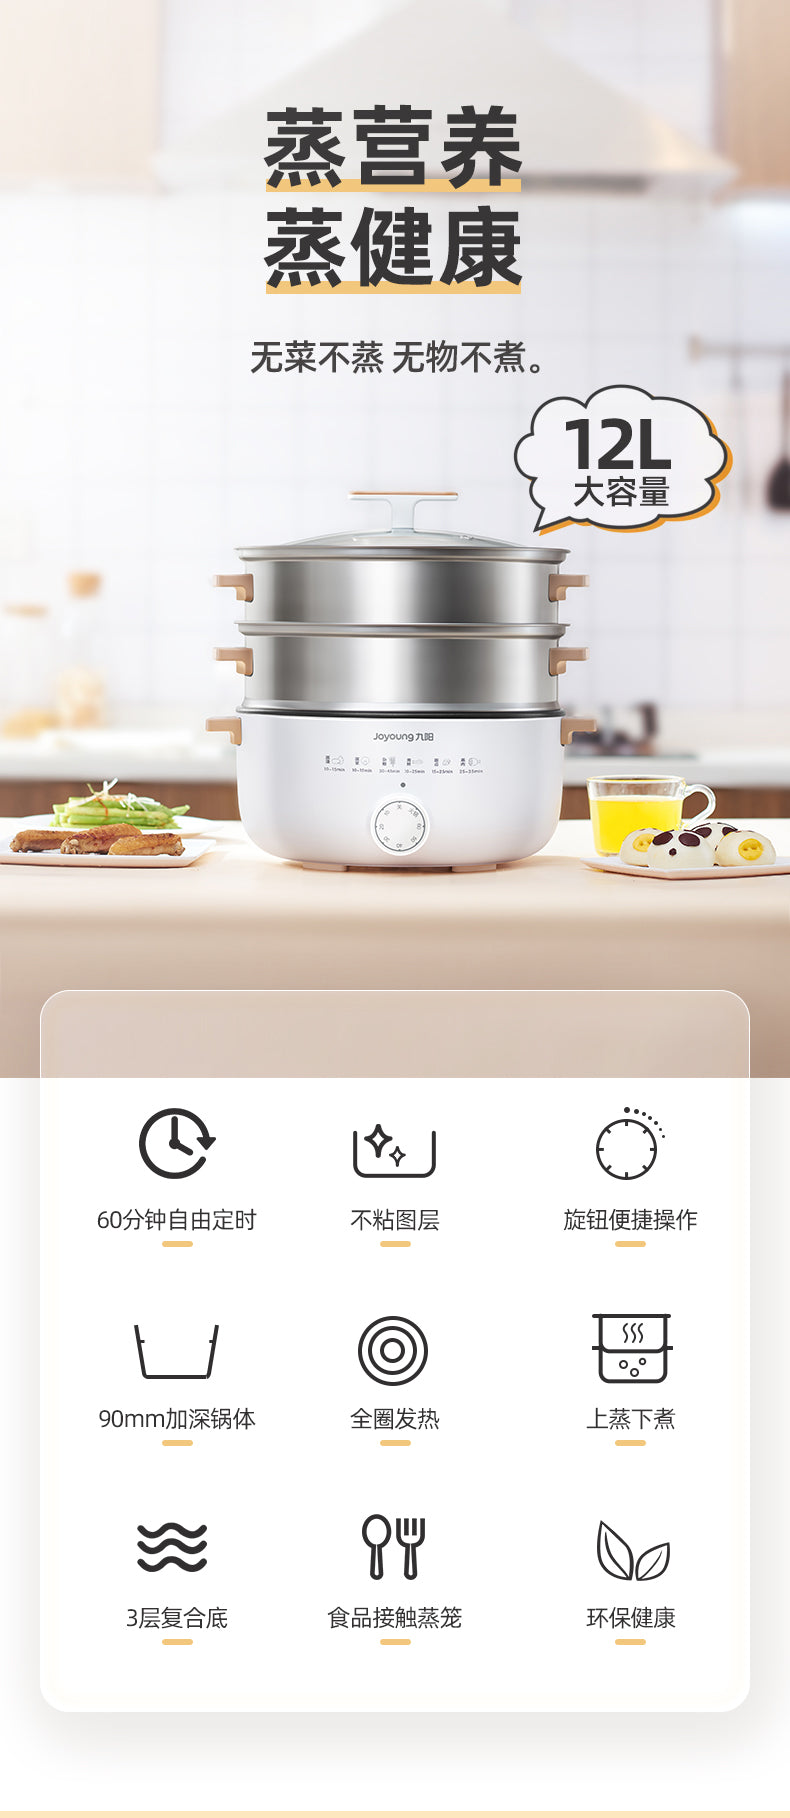 Joyoung DZ50F-GZ173 Double-layer Stainless Steel High-power Electric Steamer/ 12L Capacity/ 3-pin SG Plug